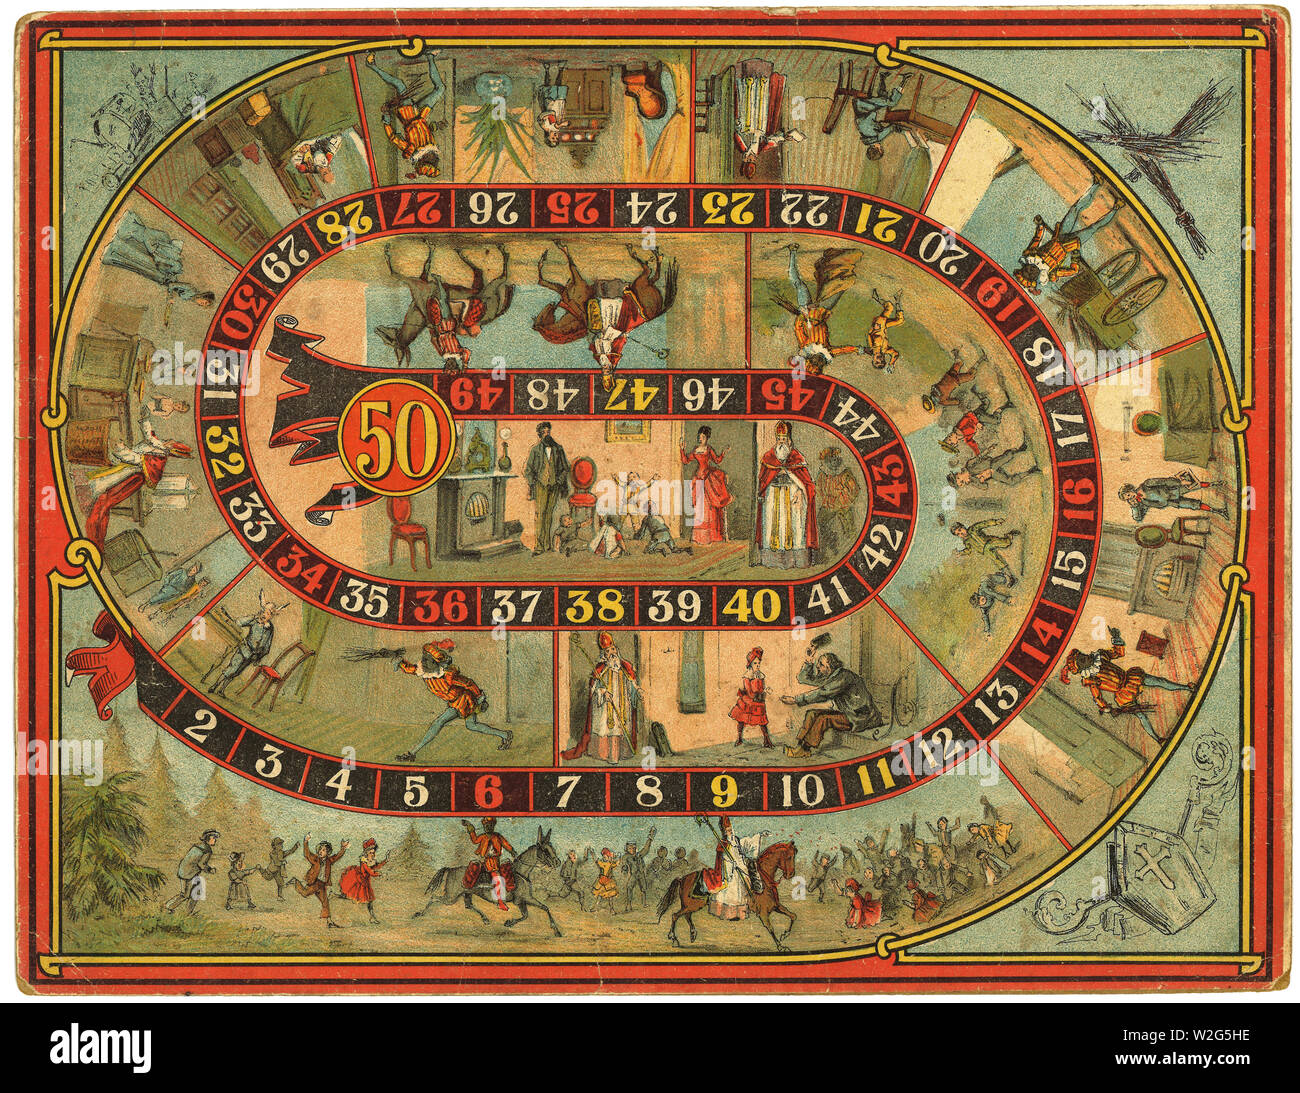 A History of Board Games - Local Histories